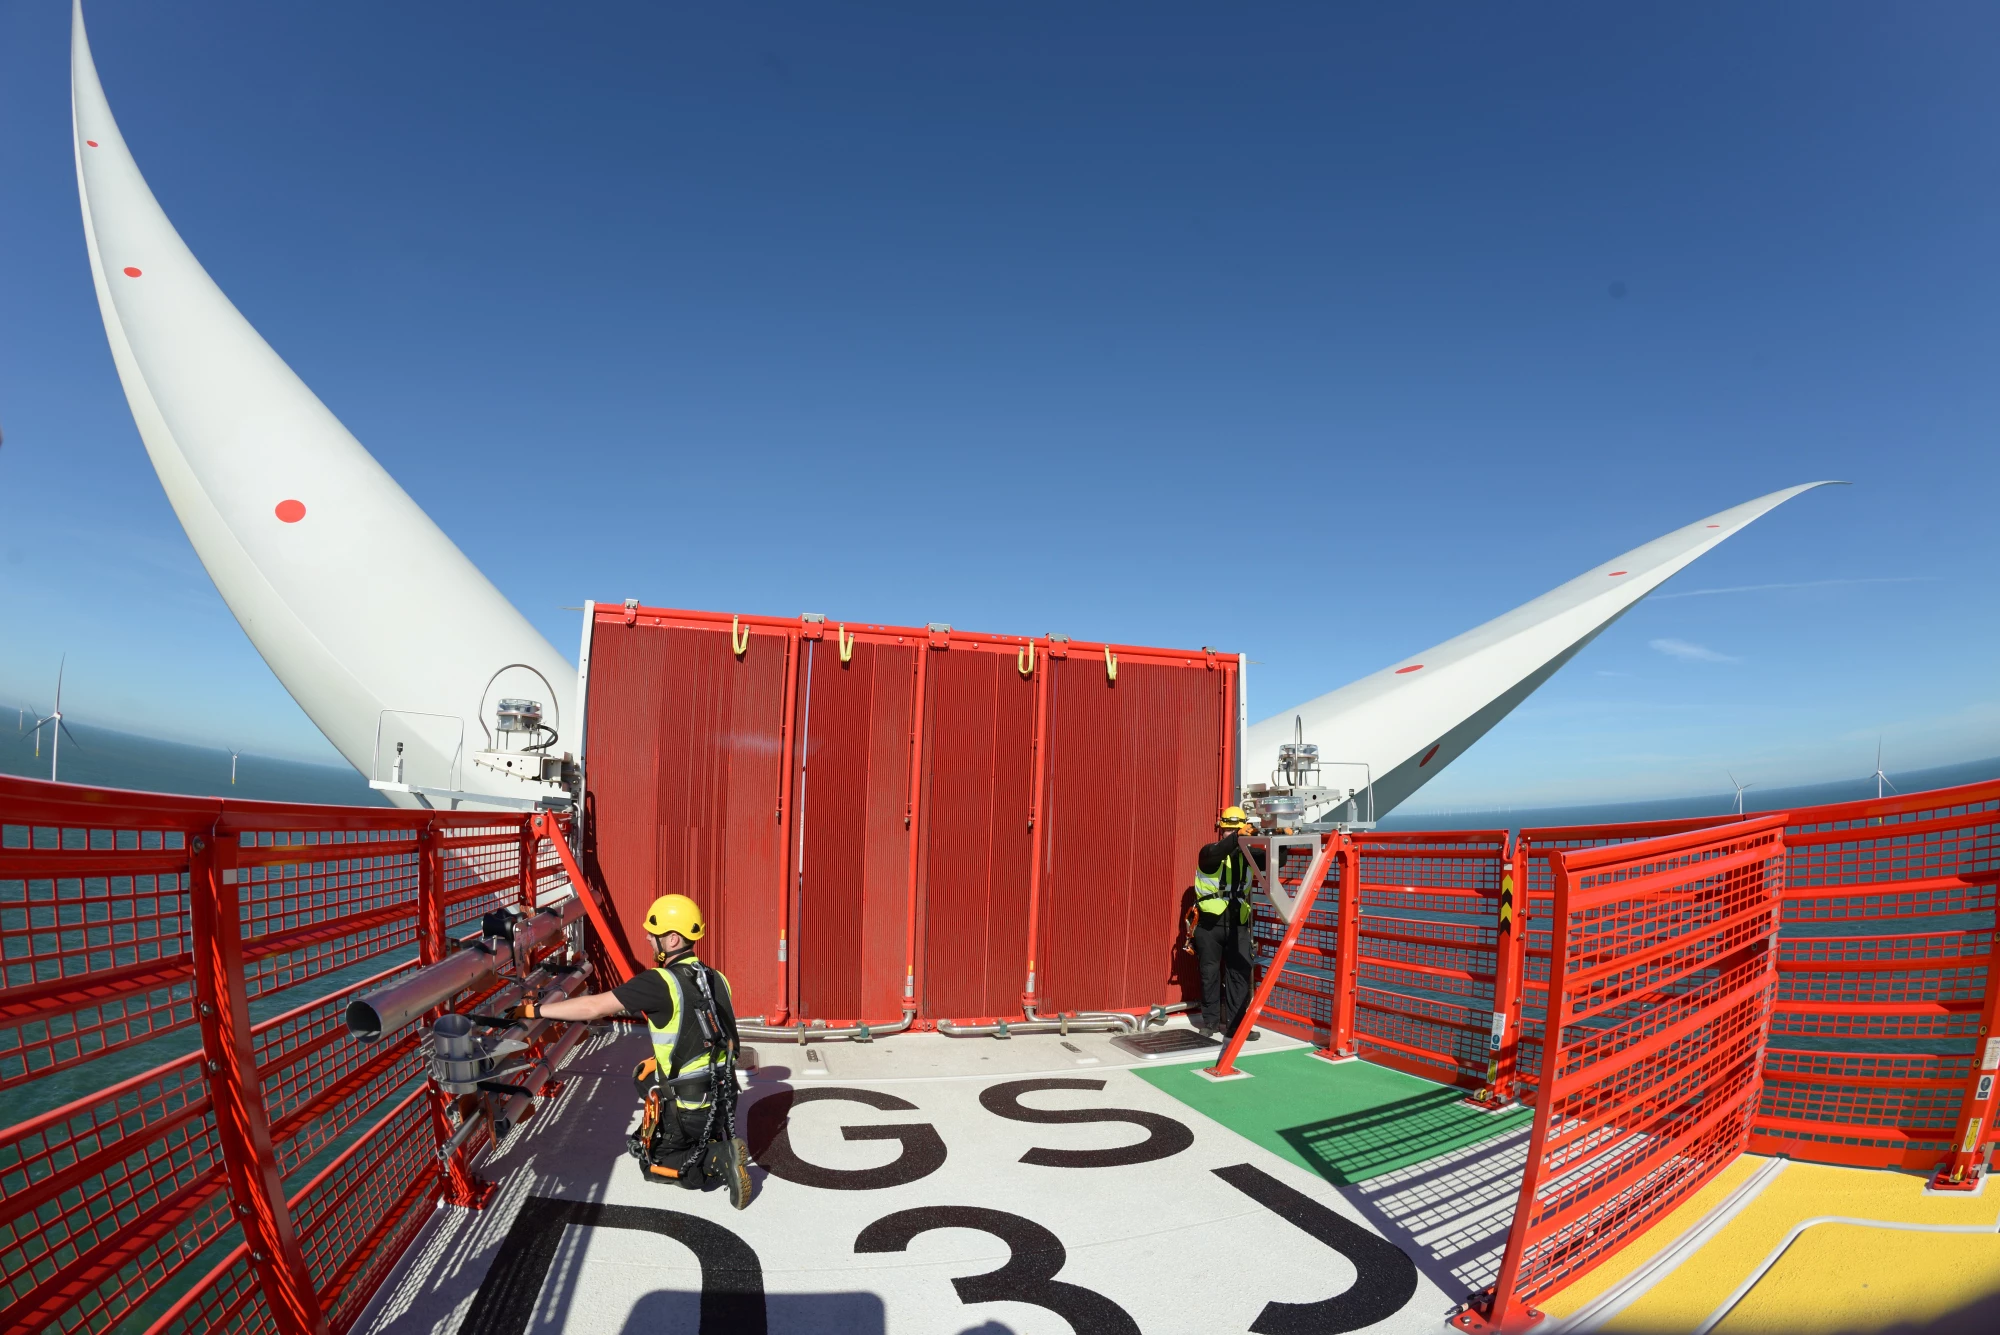 Recently inaugurated Galloper Offshore Wind Farm off the East Anglia coast was constructed and is operated by innogy